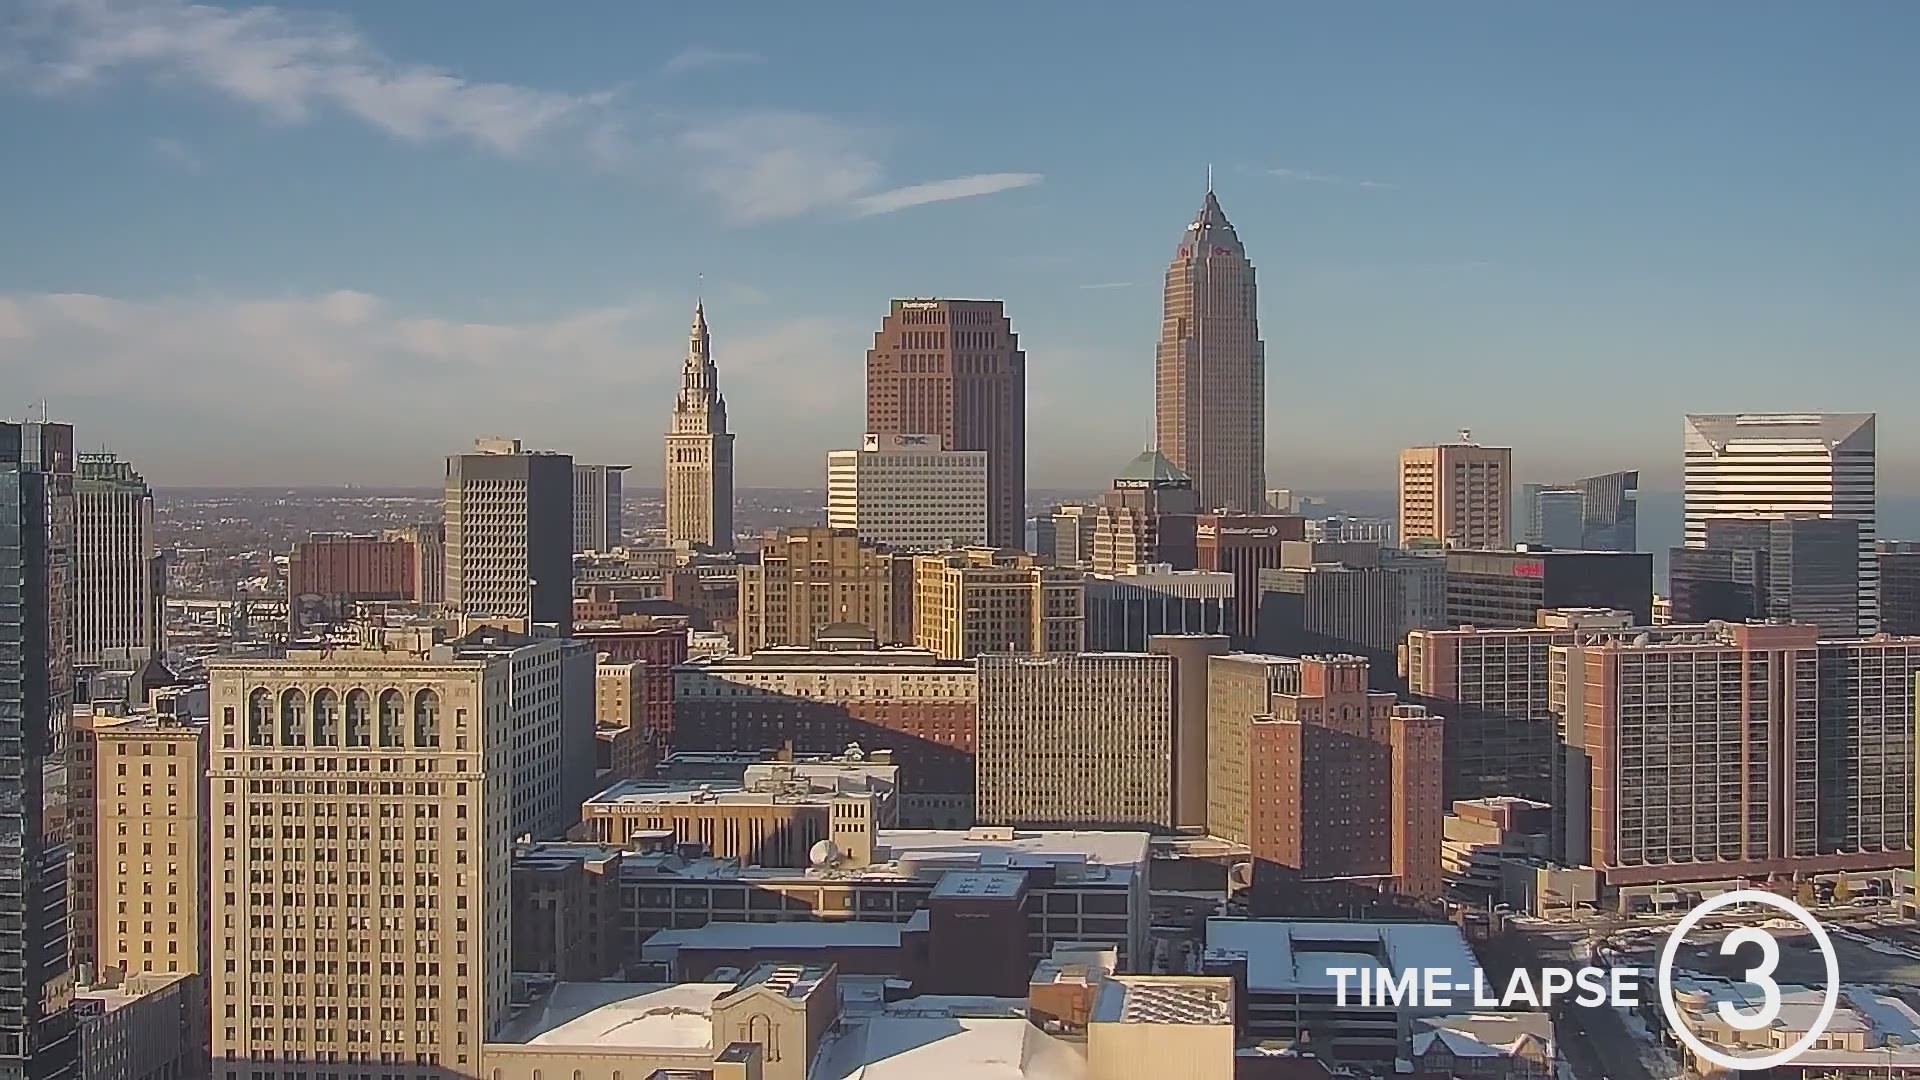 Check out Thursday's all day Cleveland weather time-lapse from the WKYC Studios CSU Cam. #3weather